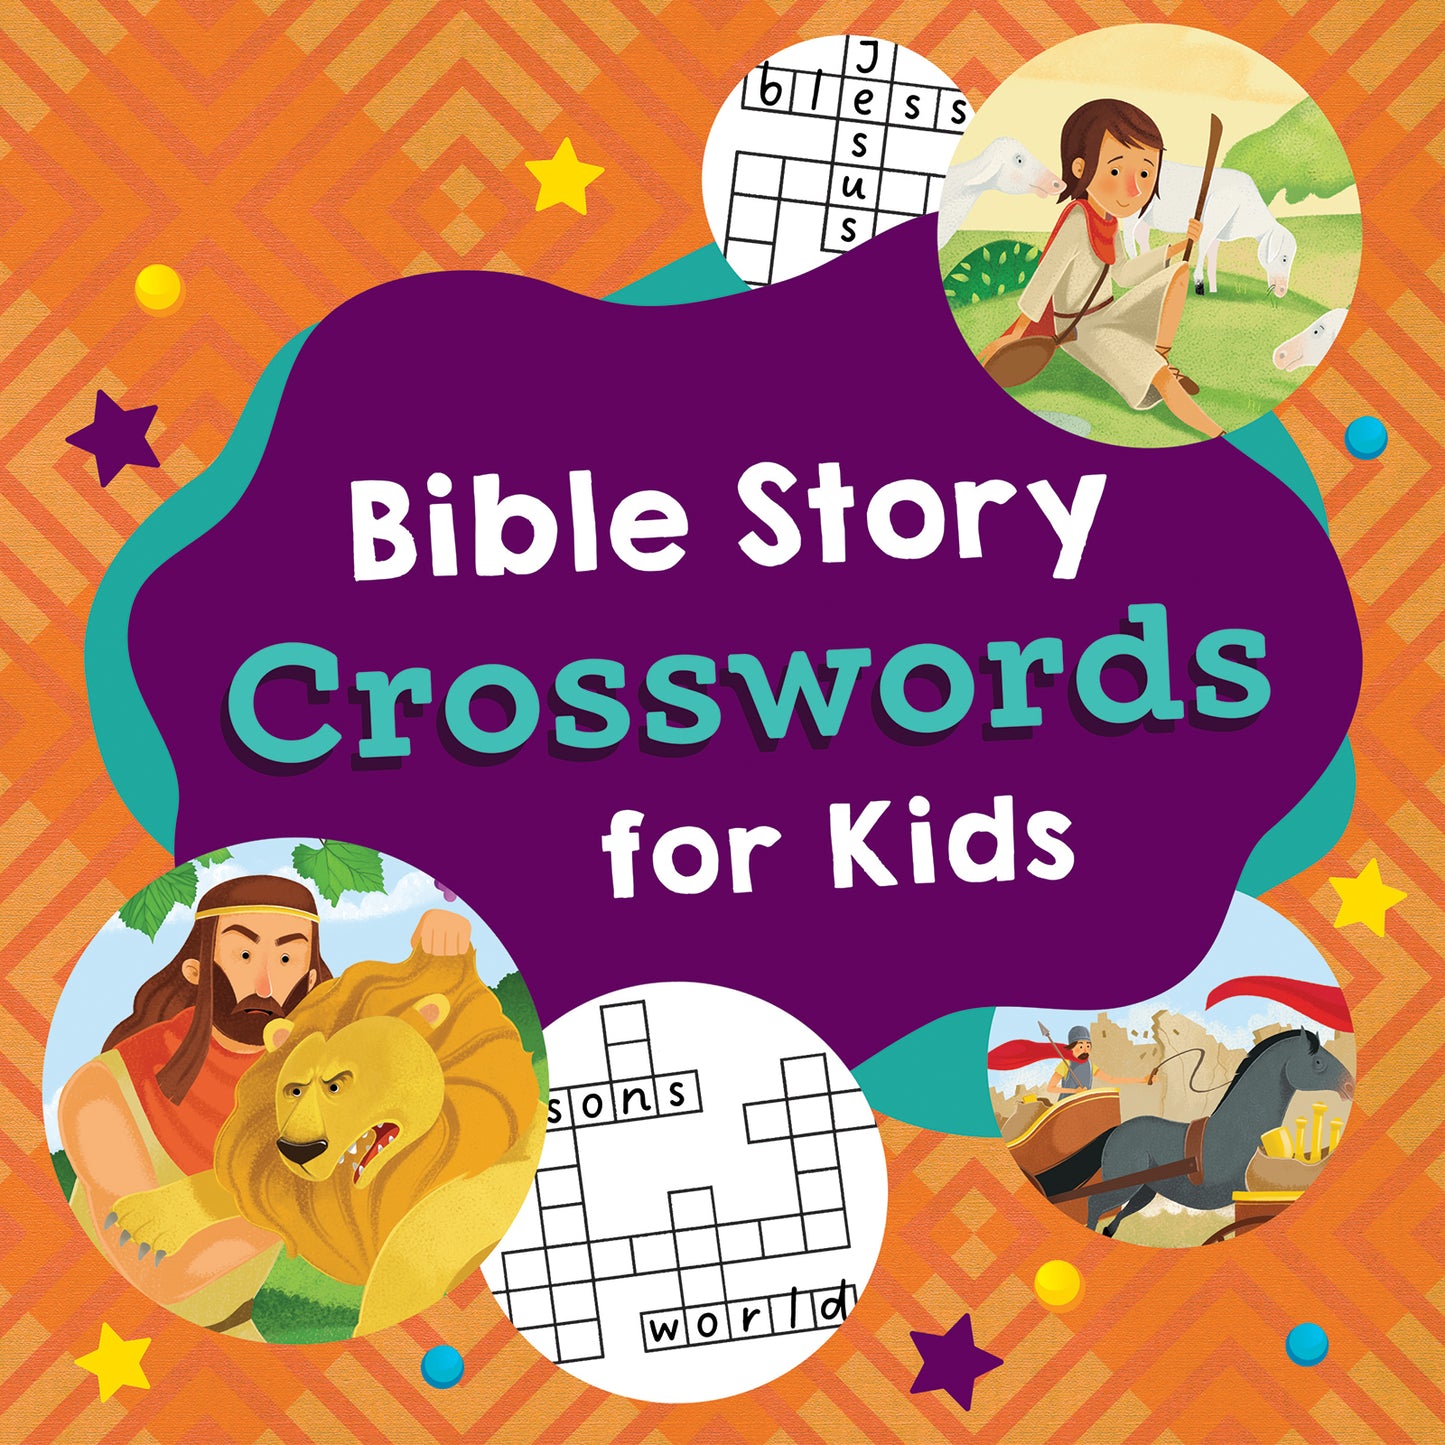 Bible Story Crosswords for Kids - The Christian Gift Company